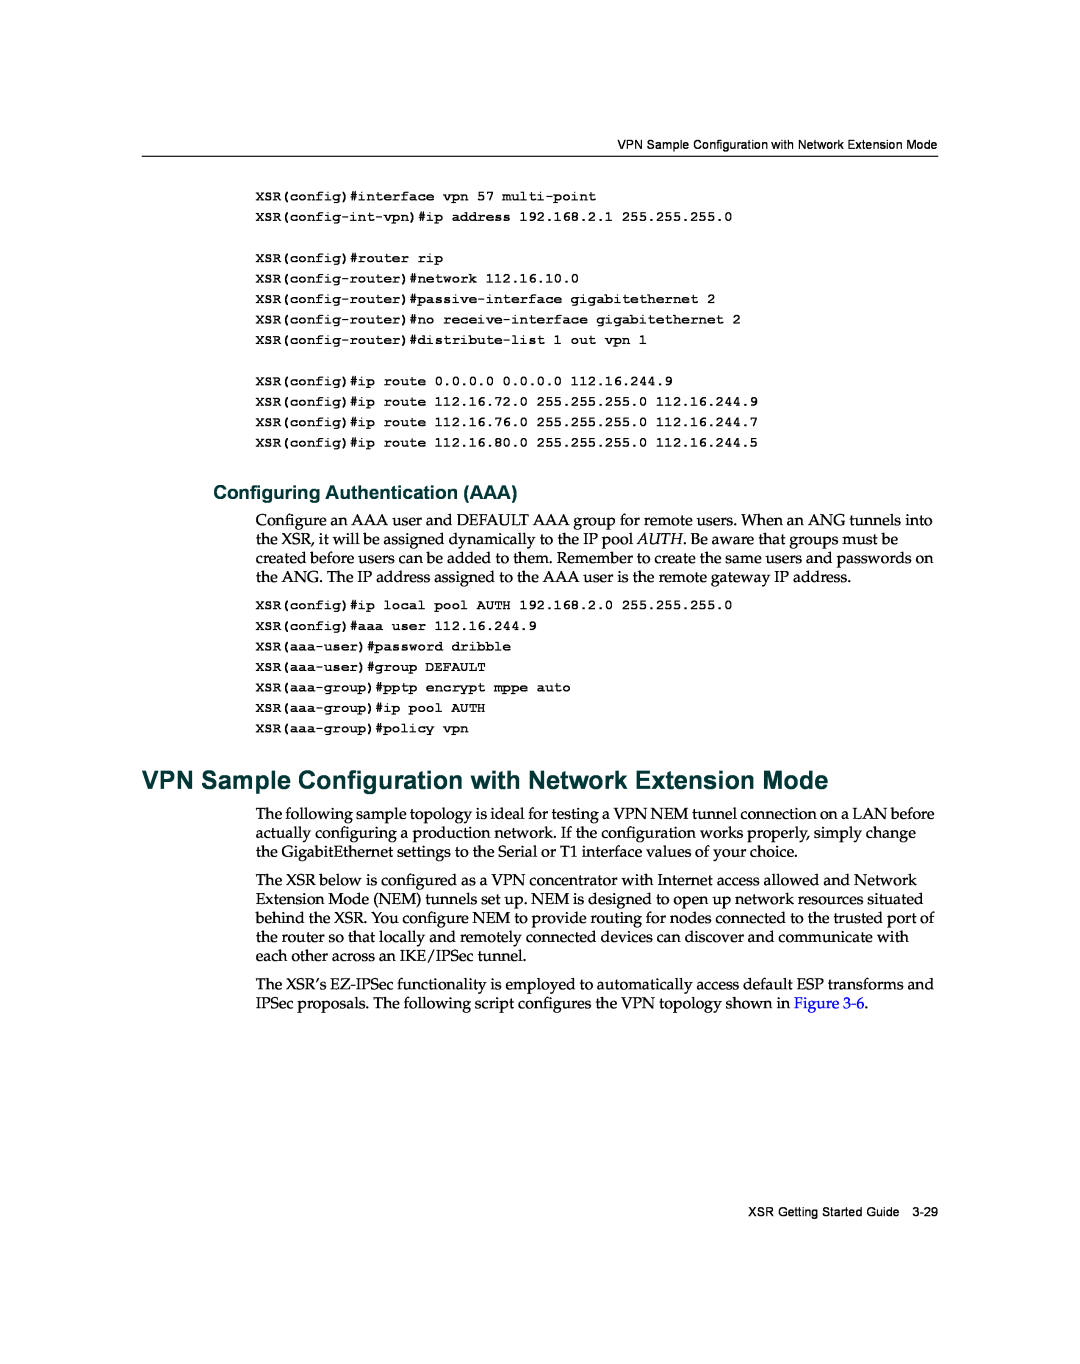 Enterasys Networks XSR-3020 manual VPN Sample Configuration with Network Extension Mode, Configuring Authentication AAA 